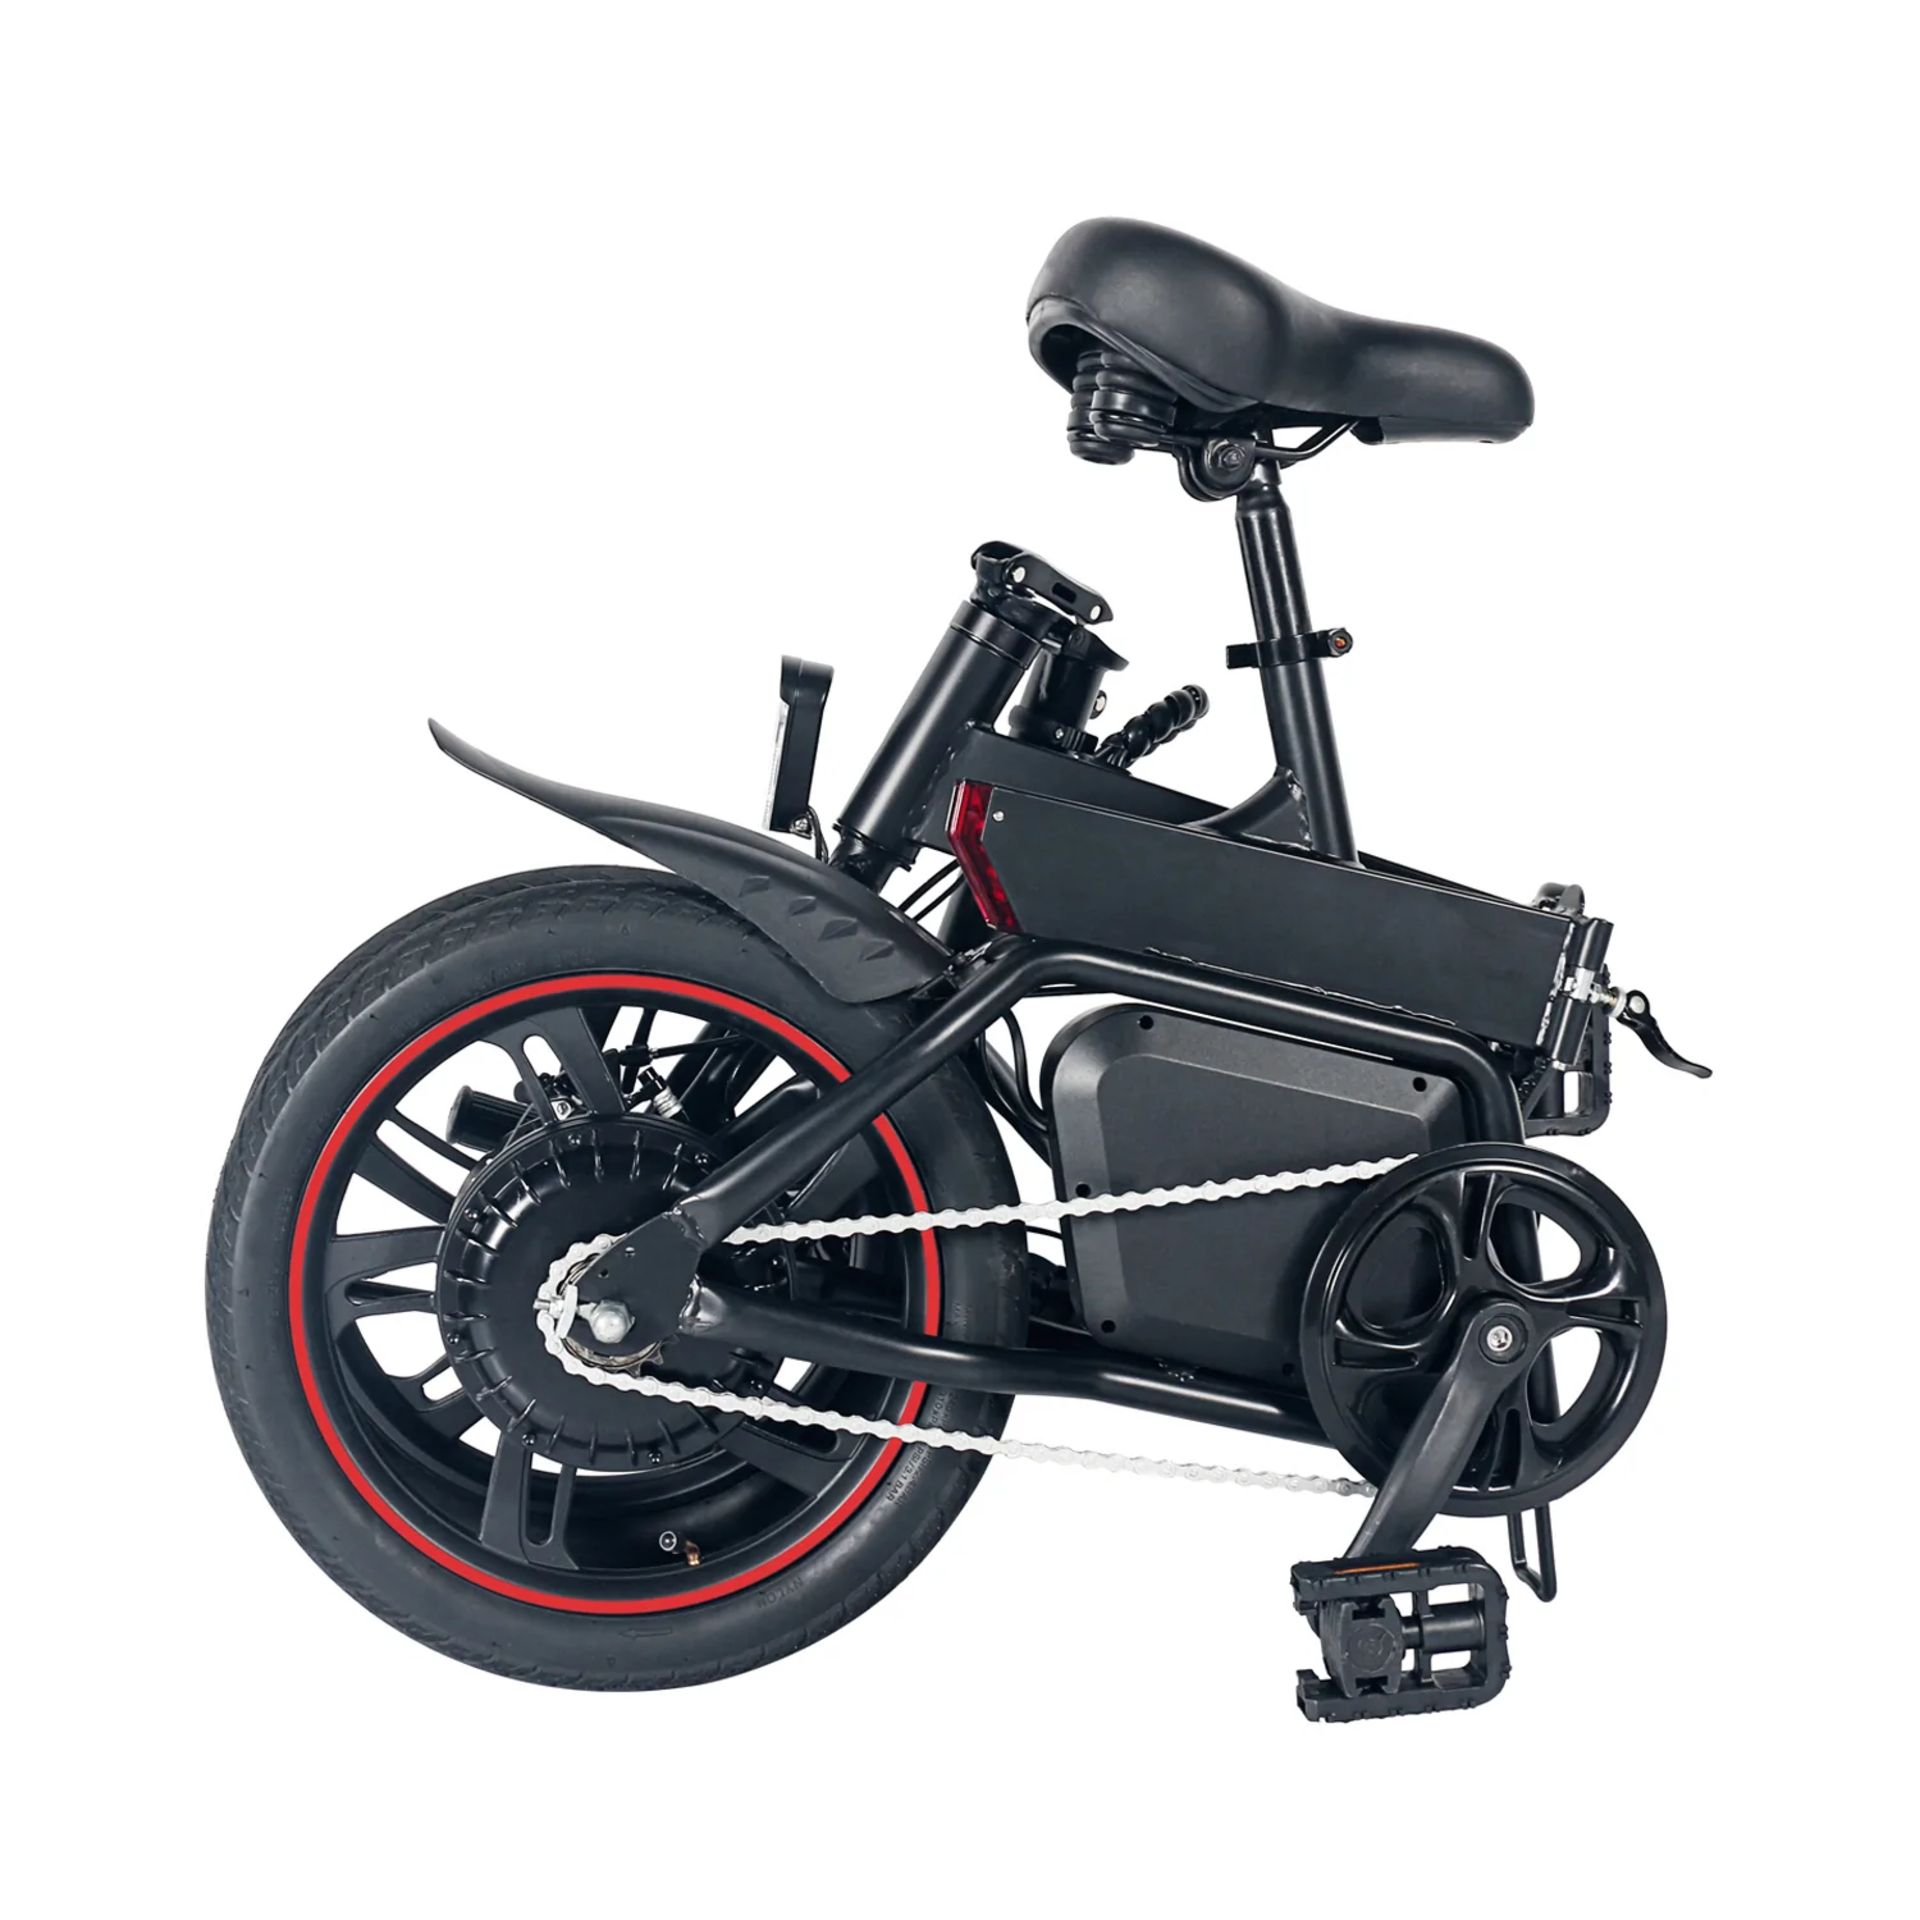 Windgoo B20 Pro Electric Bike. RRP £1,100.99. With 16-inch-wide tires and a frame of upgraded - Image 2 of 7